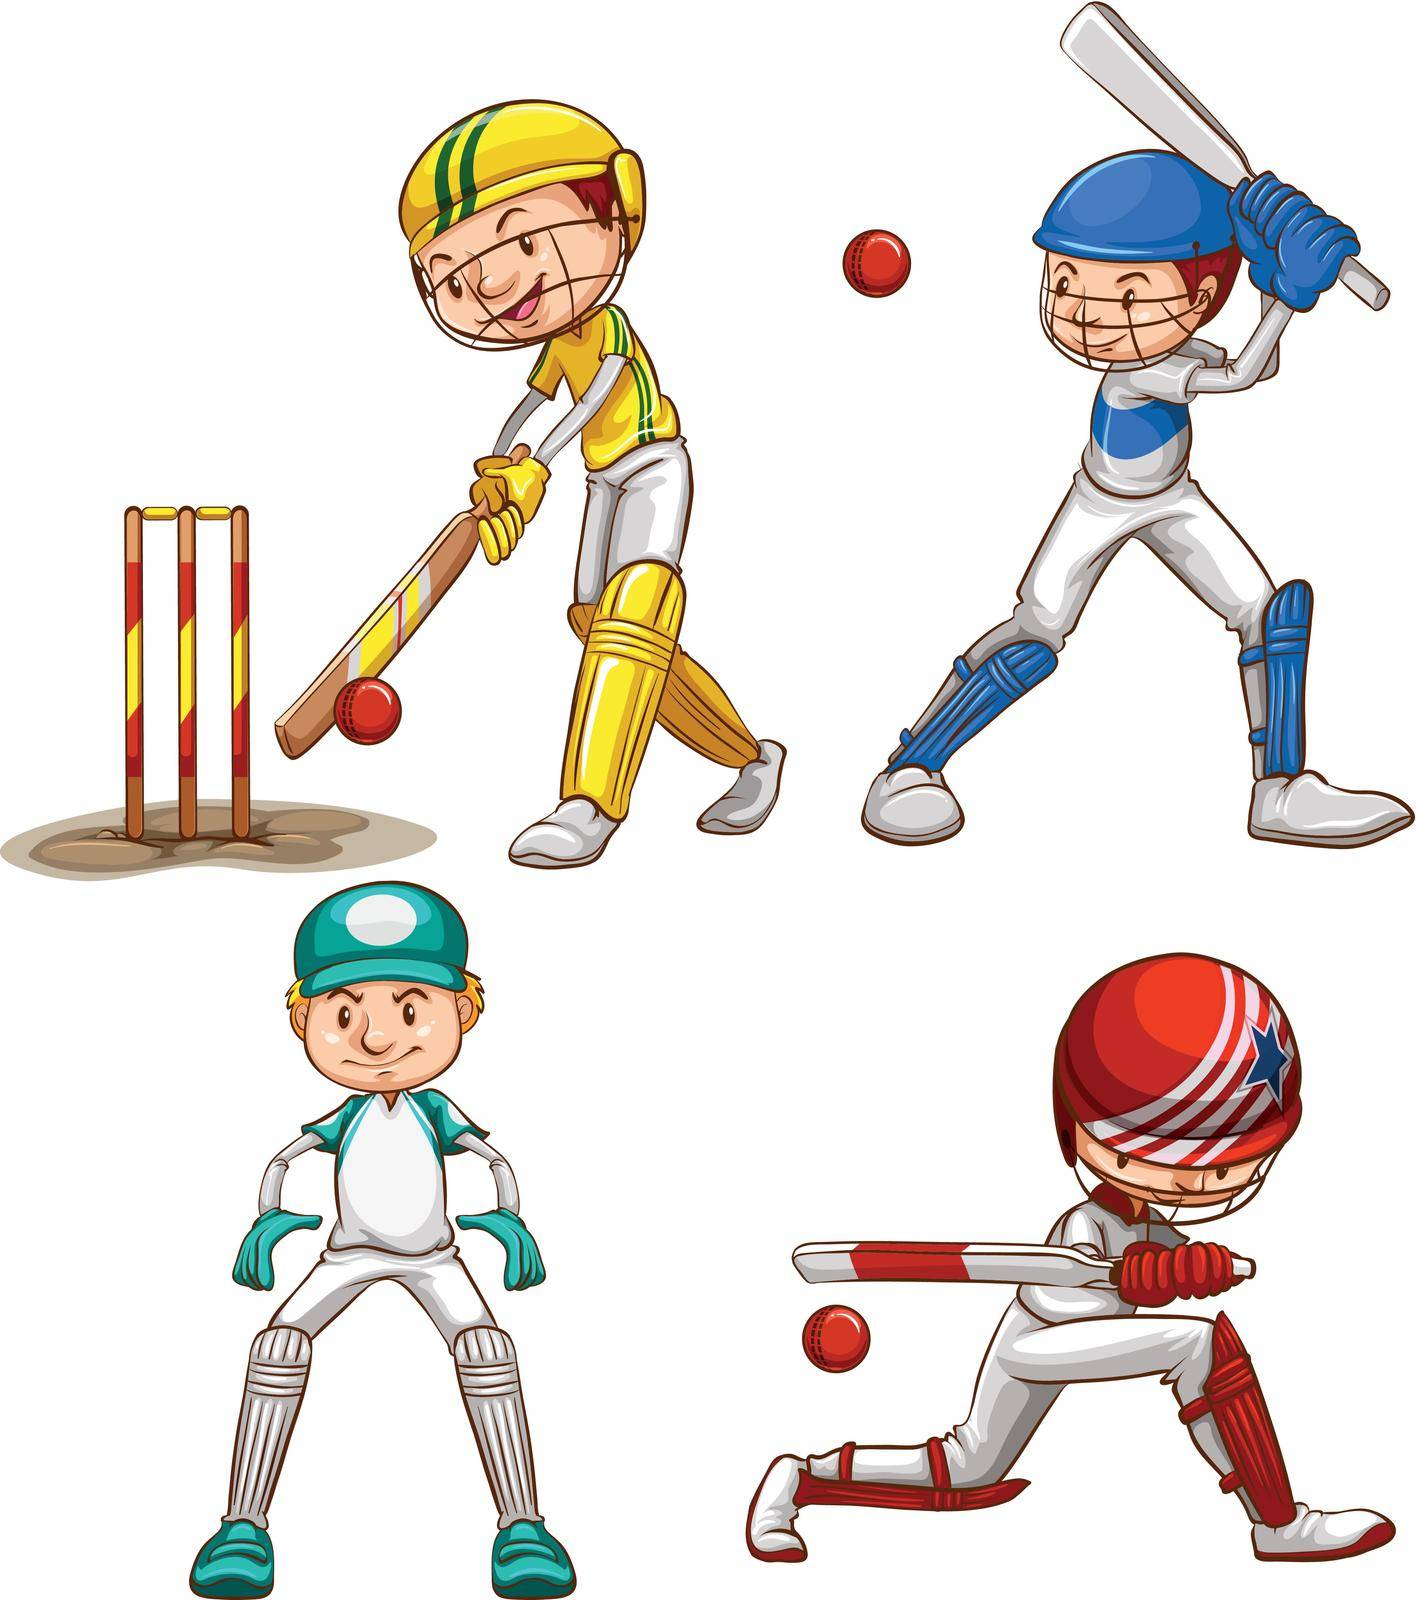 Simple sketches of men playing cricket by iimages